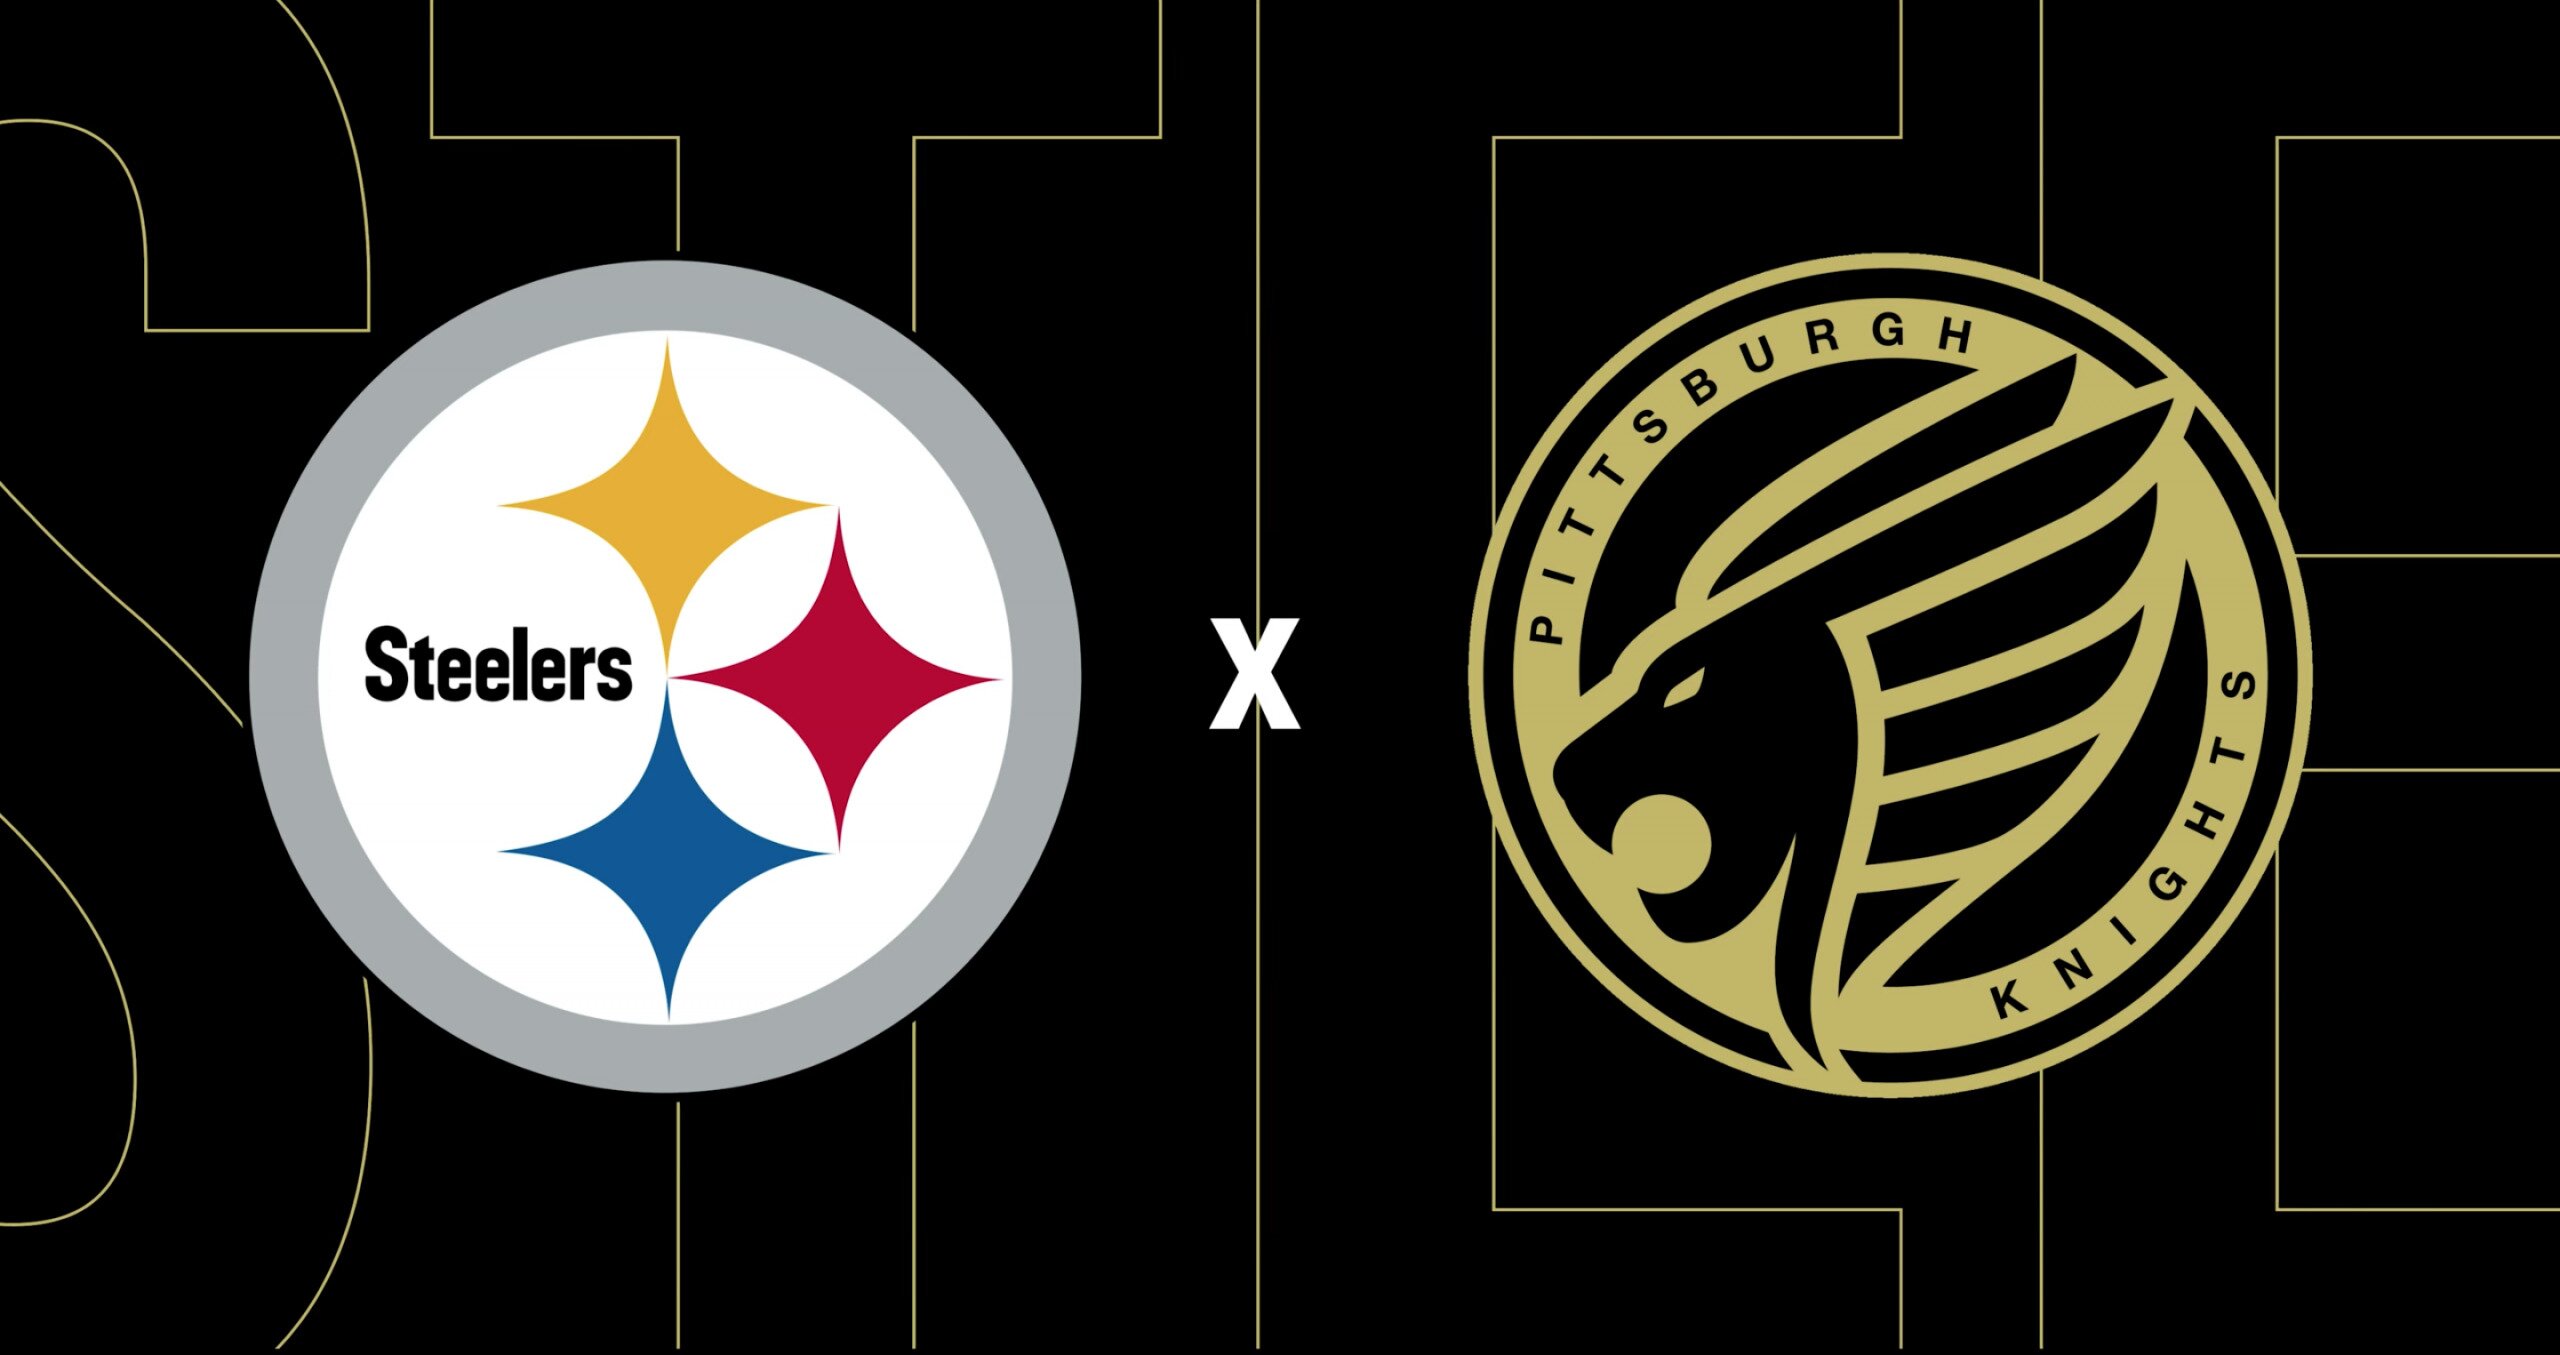 The Steelers become the fifth NFL team to invest in esports.